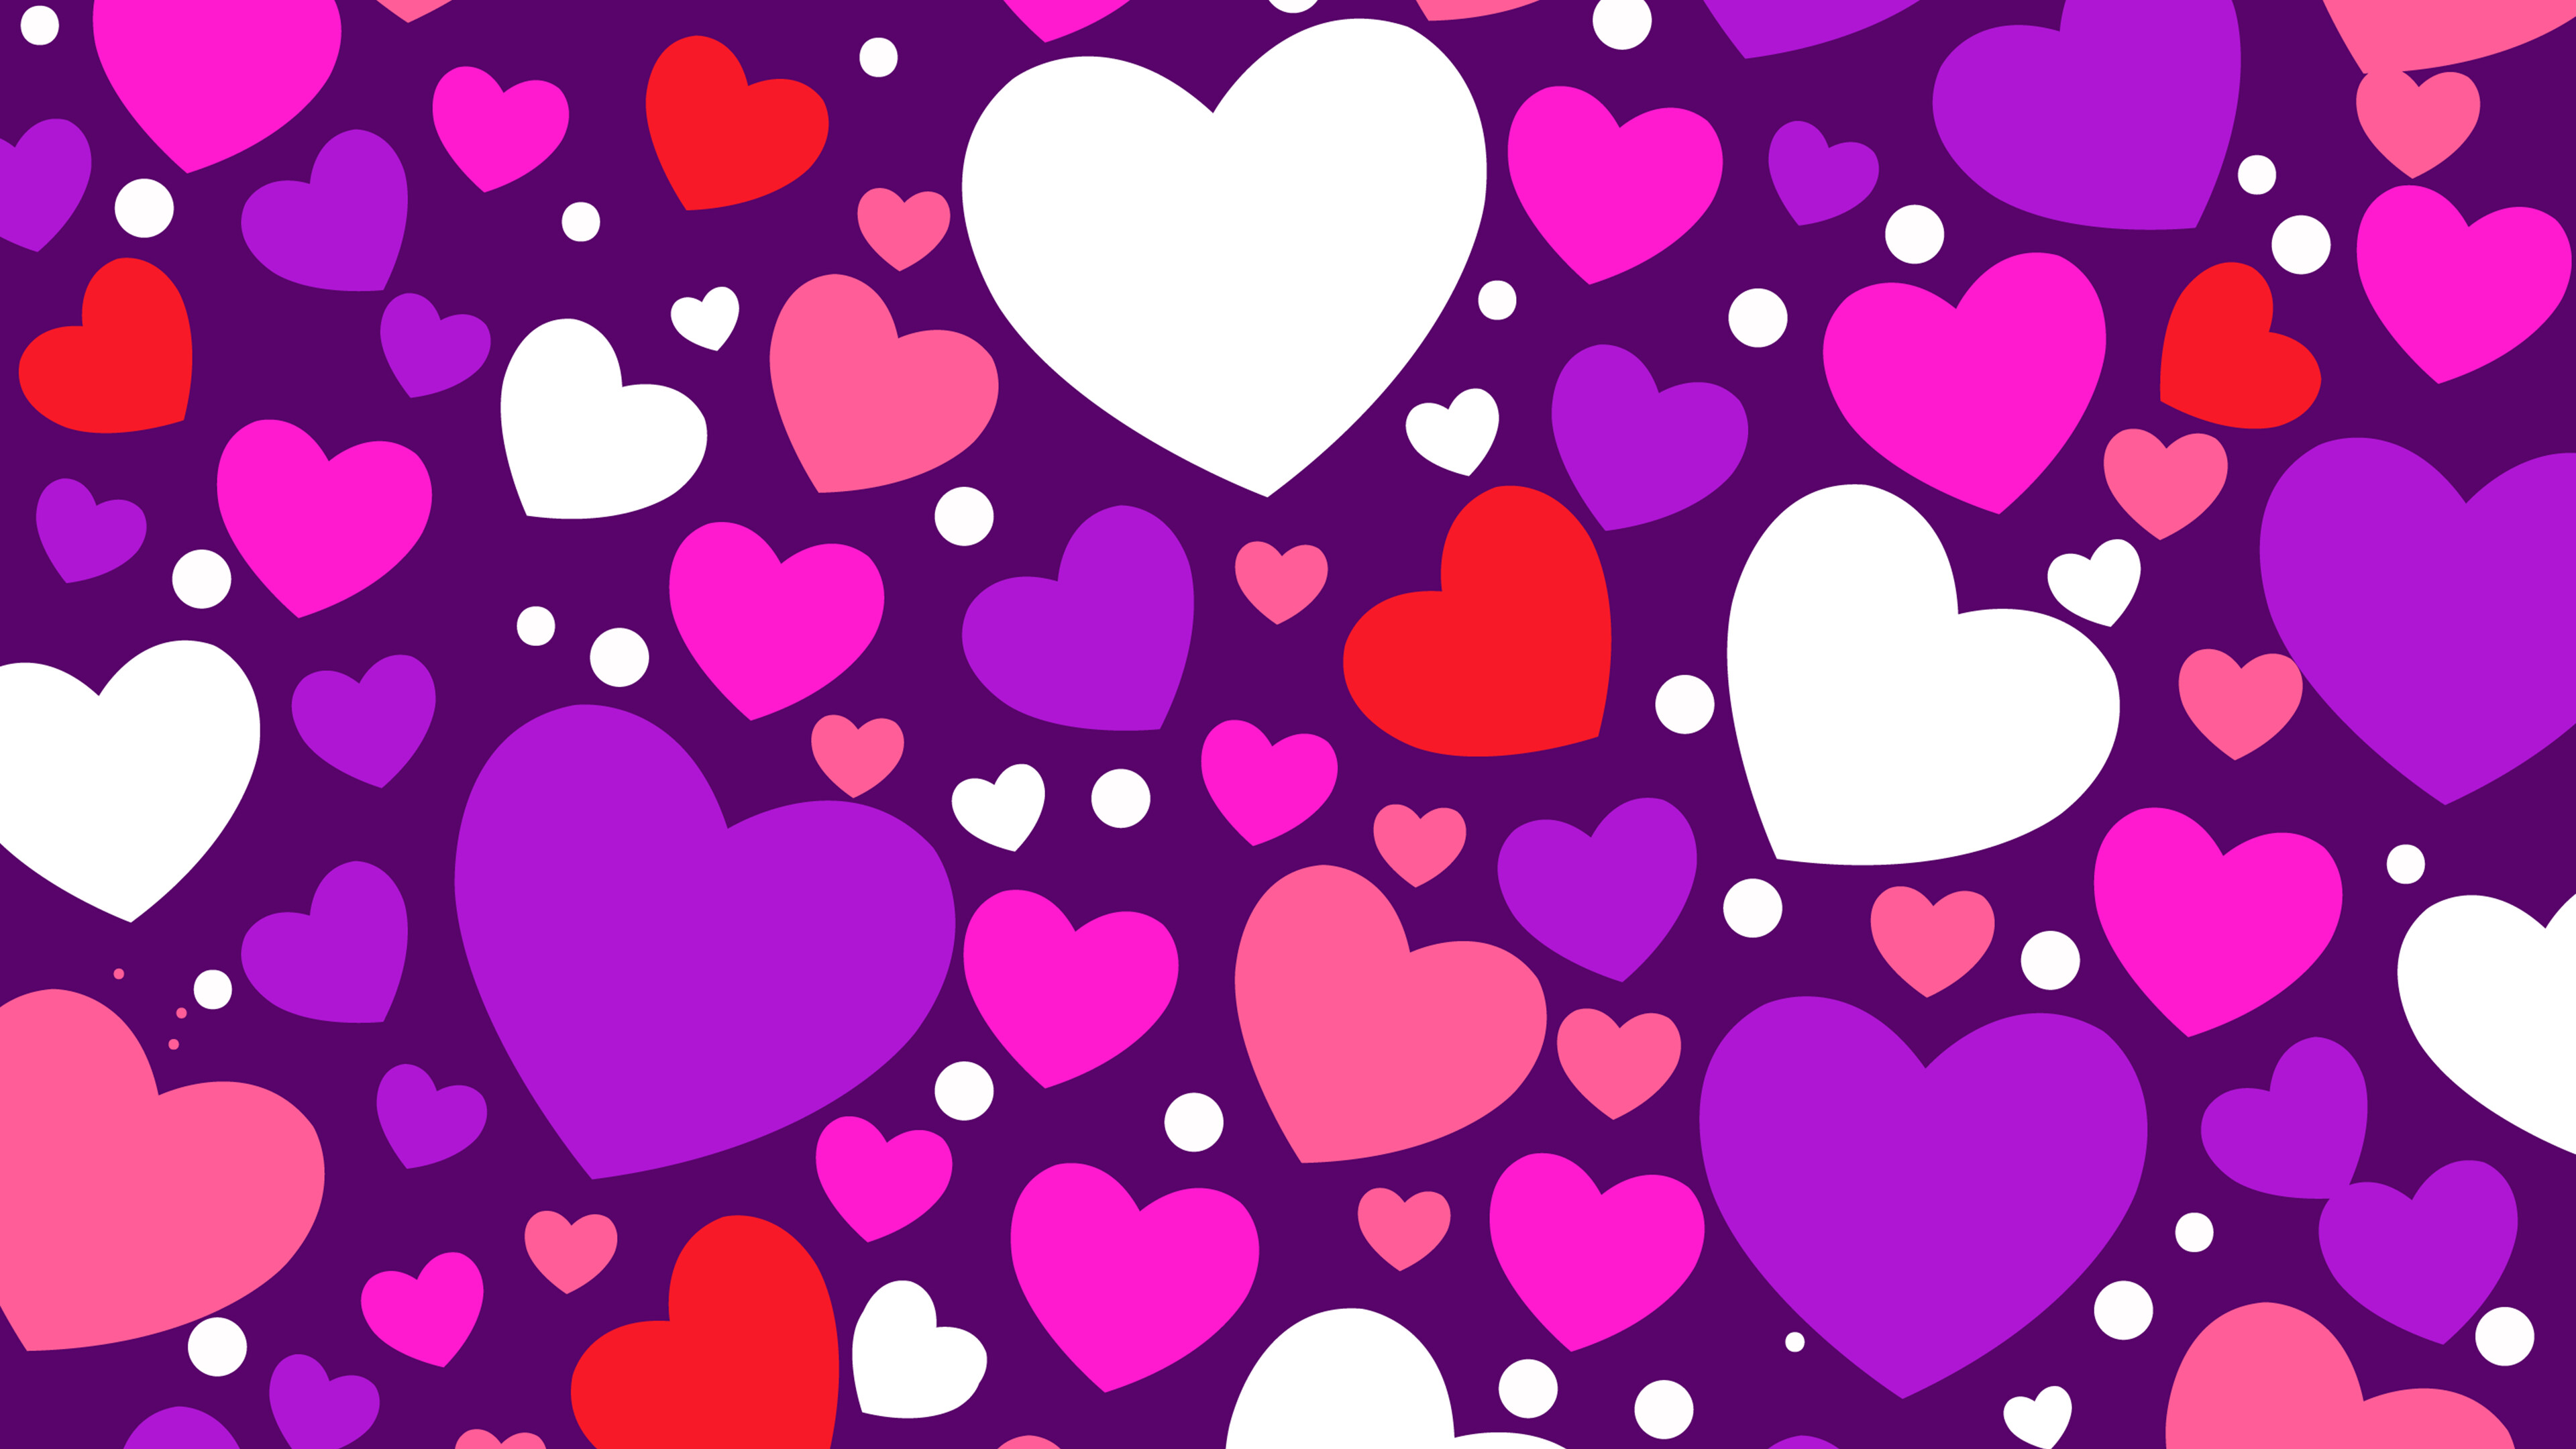 Heart: An emblematic symbol in many religions, signifying "truth, conscience or moral courage. 3840x2160 4K Background.